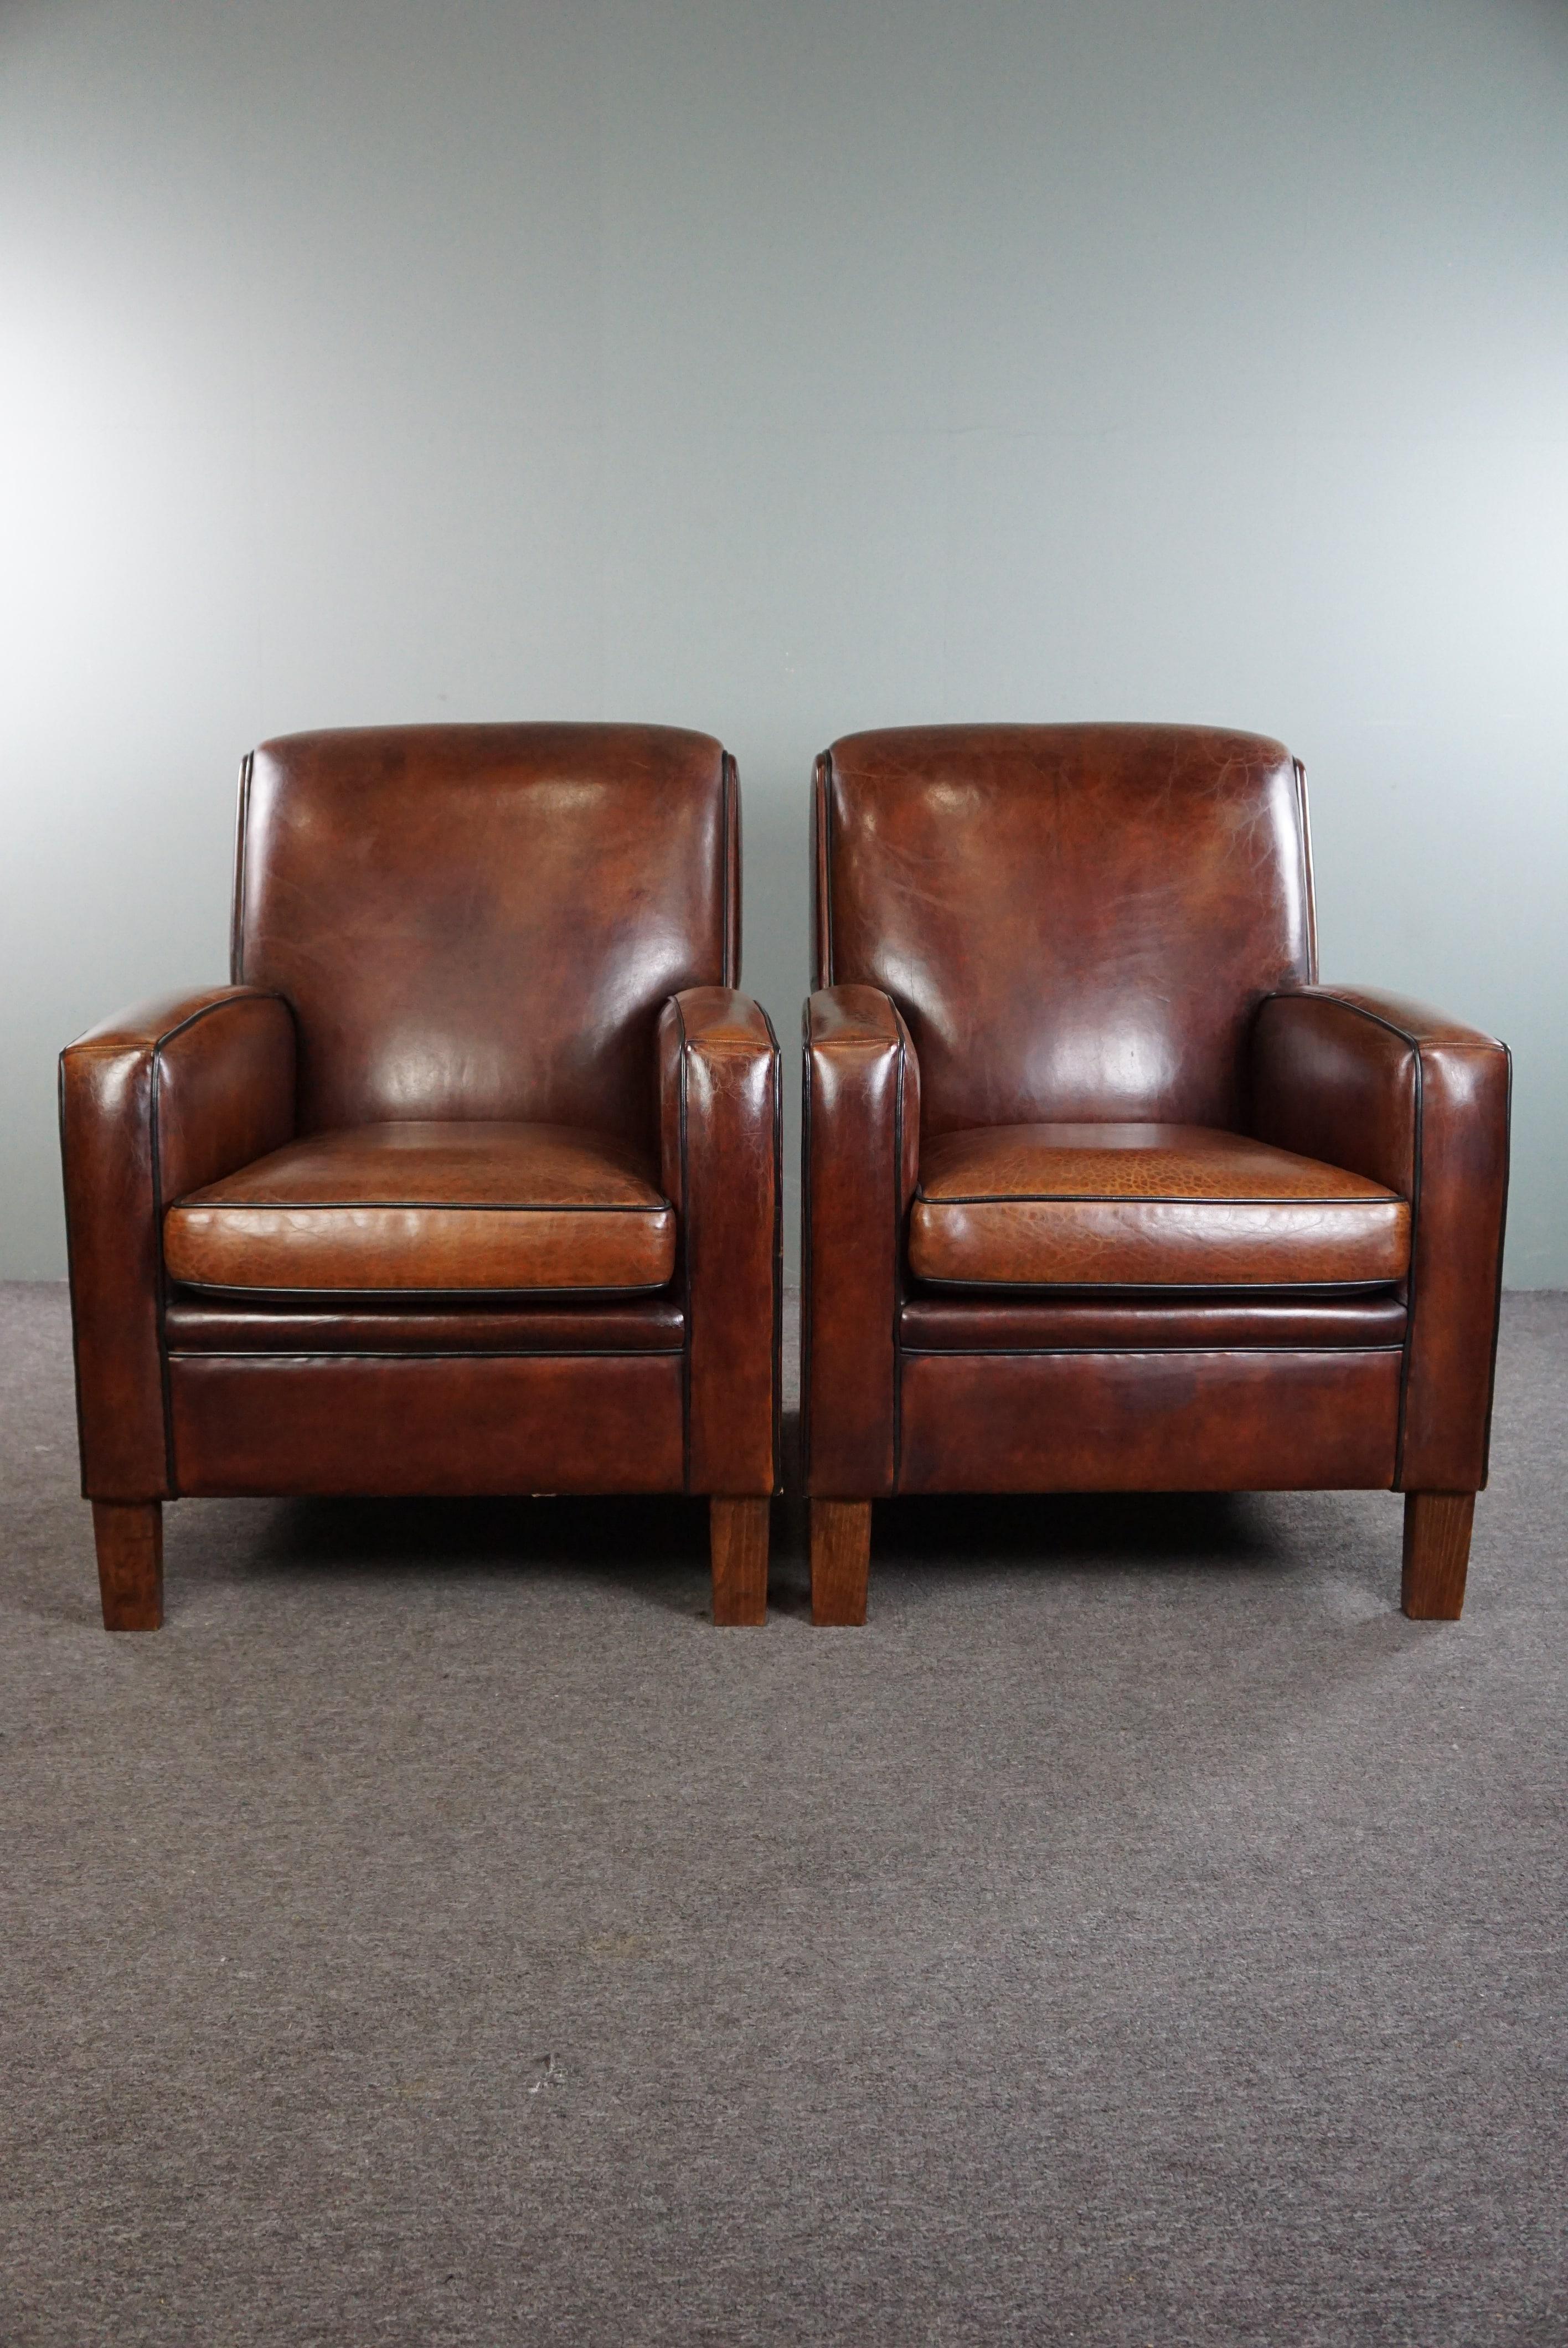 Offered: this very beautiful set of 2 top-quality Art Deco design armchairs made of first-class sheep leather.

This stunning set, crafted from only the finest materials, features a detachable seat cushion and offers exceptional seating comfort. The